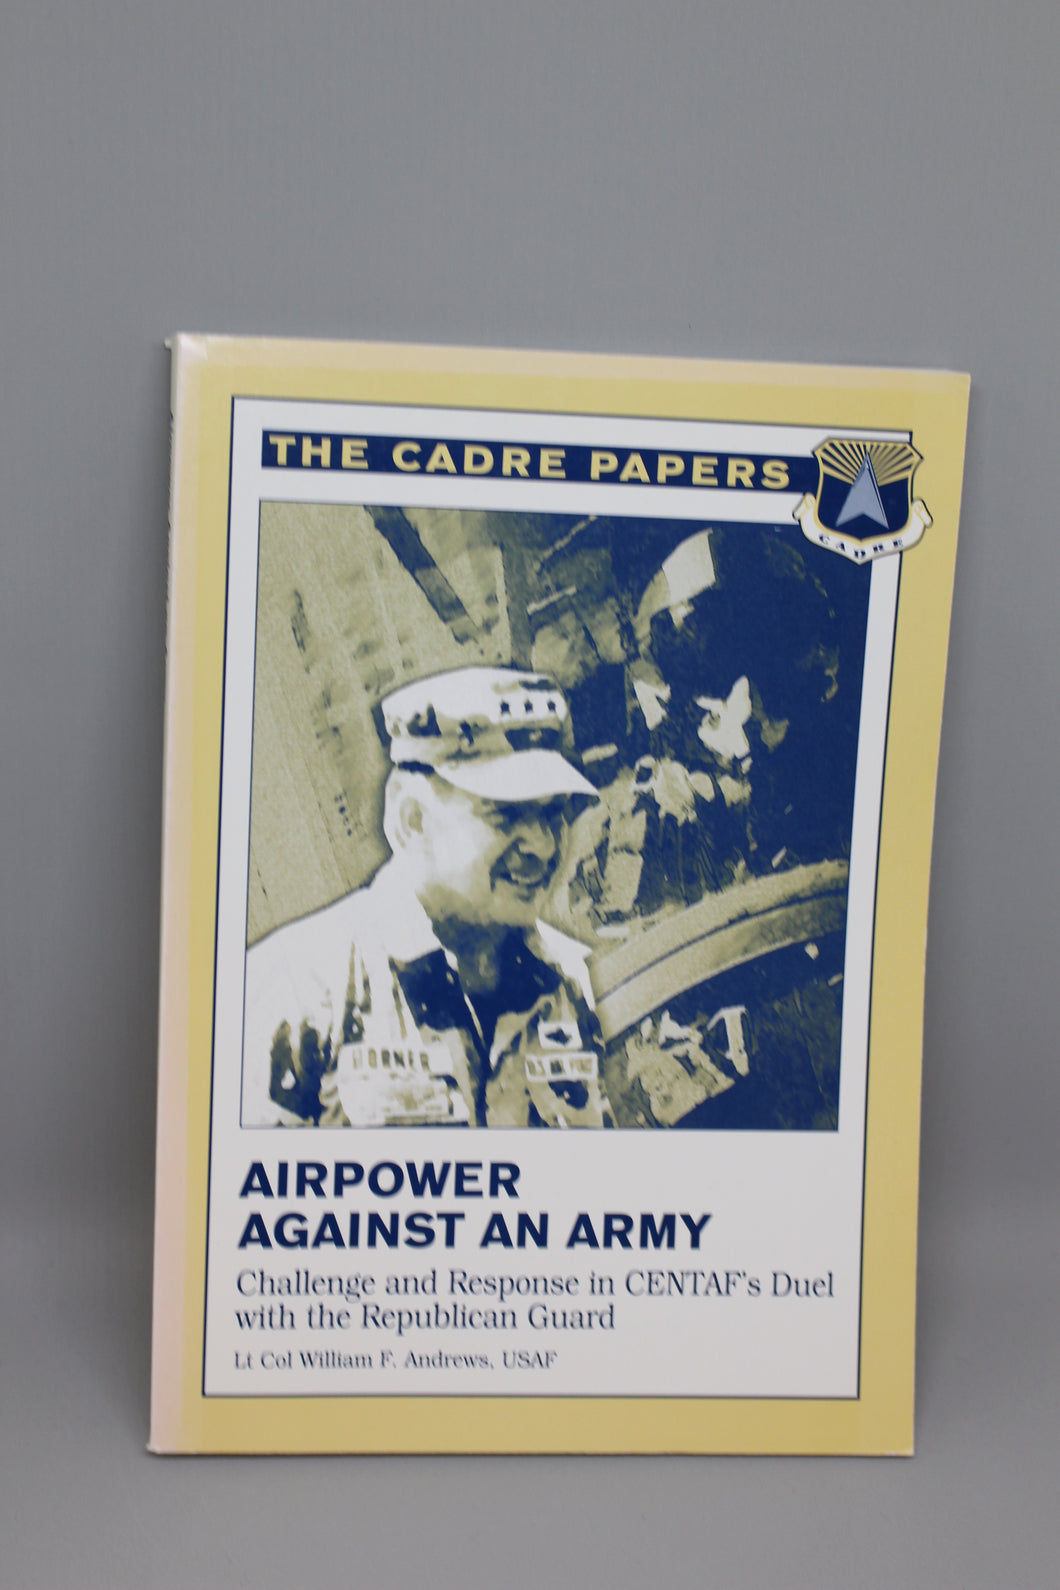 The Cadre Papers: Airpower Against an Army